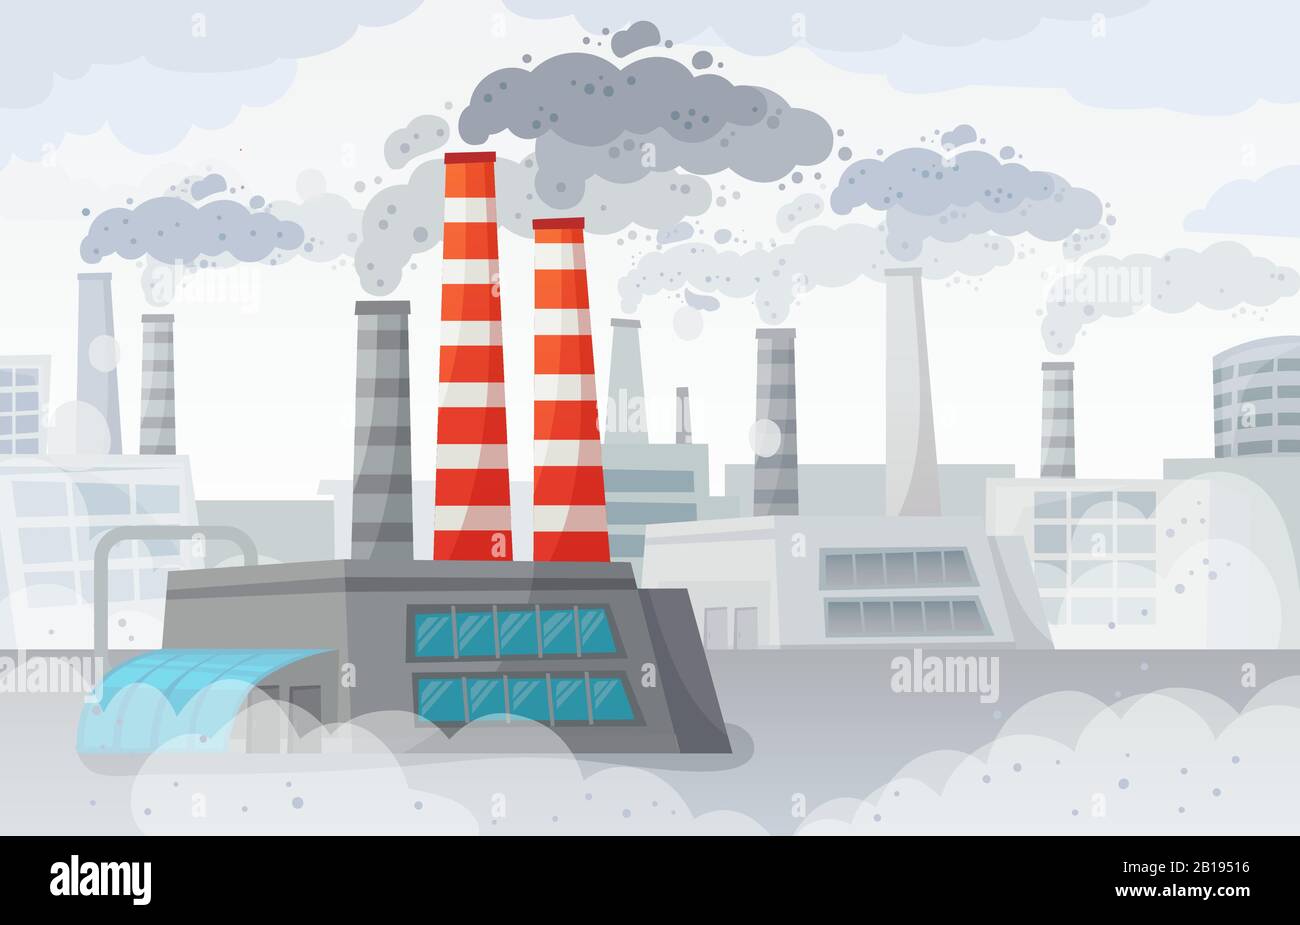 Factory air pollution. Polluted environment, industrial smog and industry smoke clouds vector illustration Stock Vector